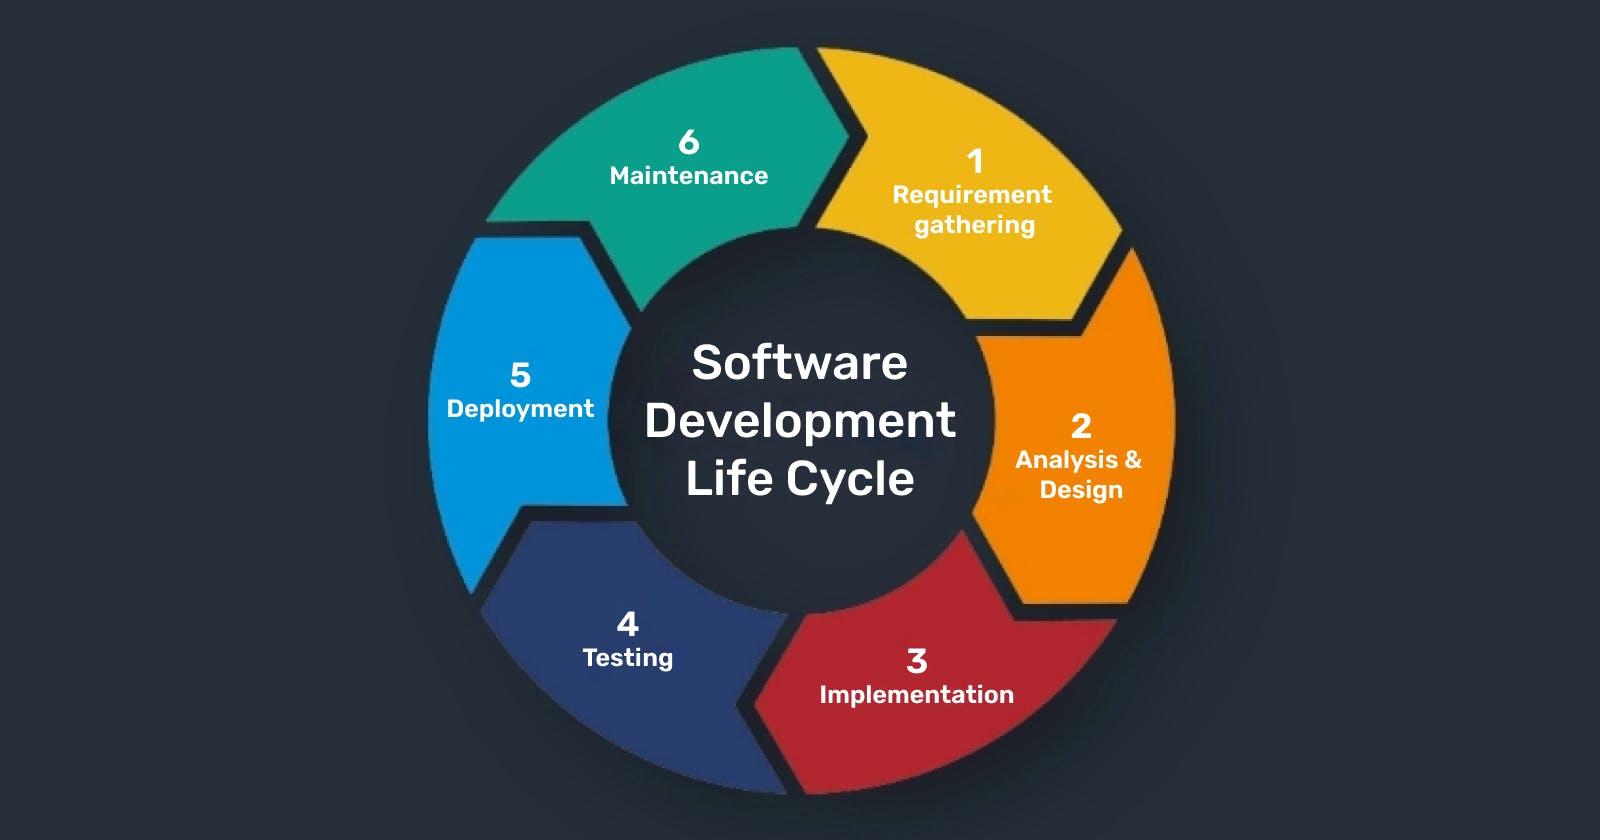 The 6 Stages of the Software Development Life Cycle (SDLC) Explained